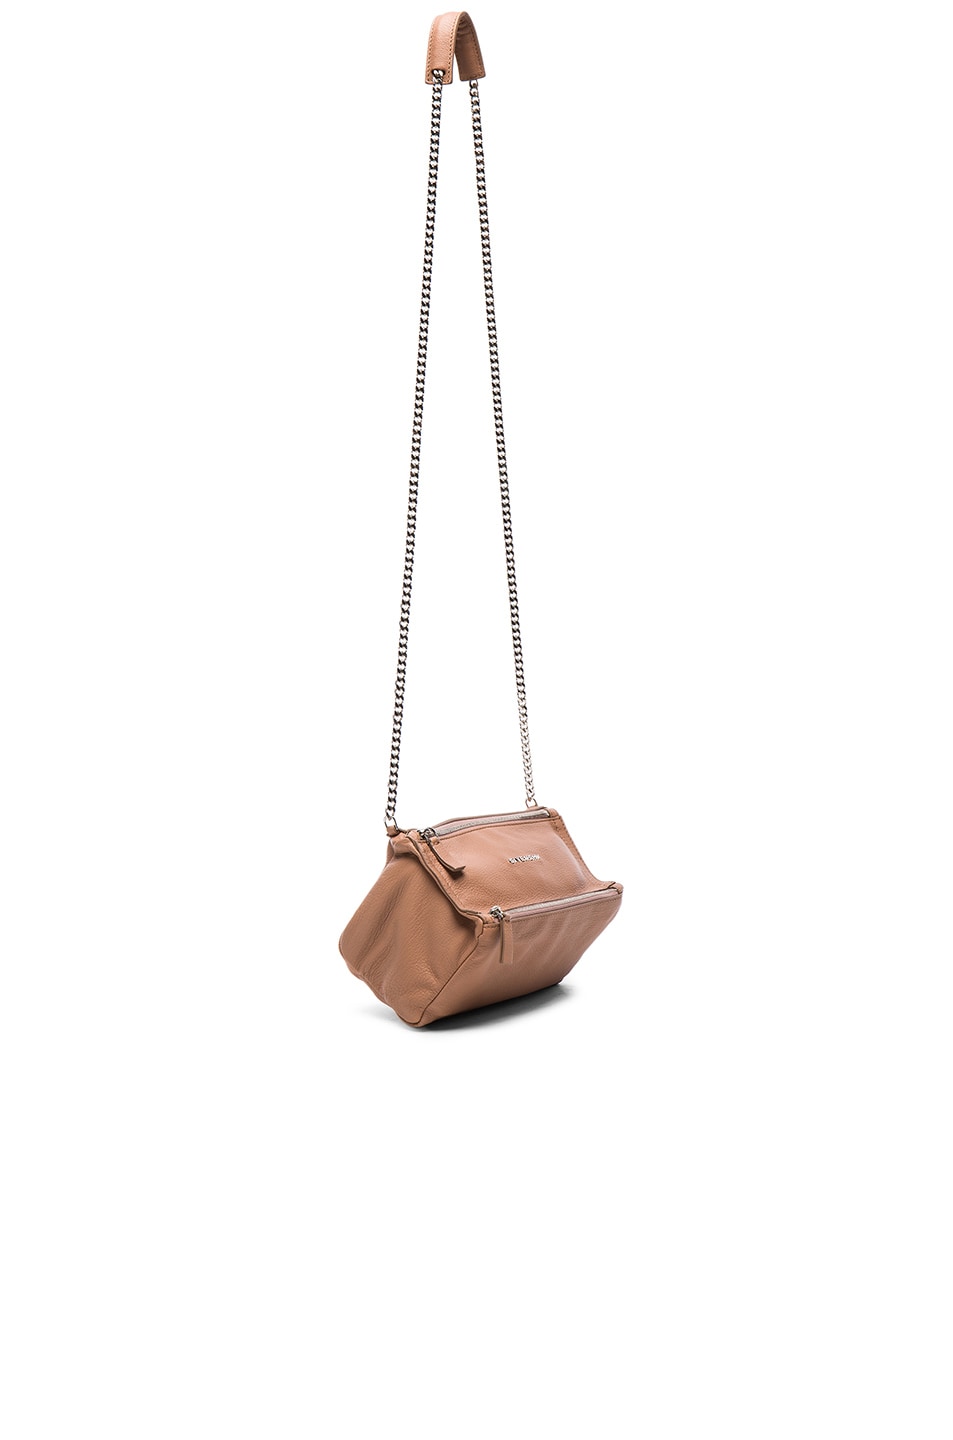 Image 1 of Givenchy Pandora Mini Chain Bag in Old Pink